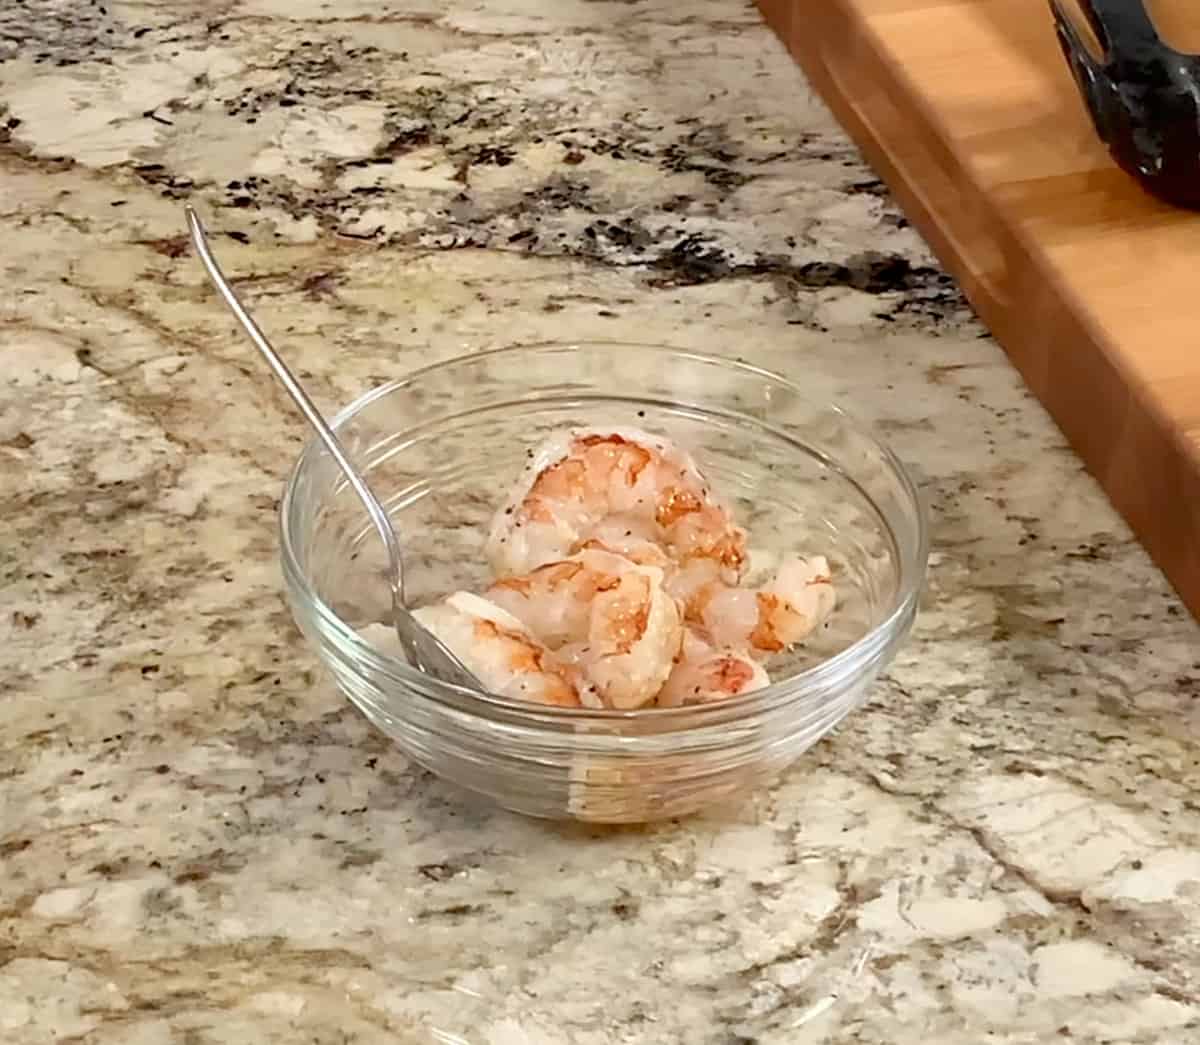 shrimp seasoned with salt and pepper in a small bowl on a kitchen counter